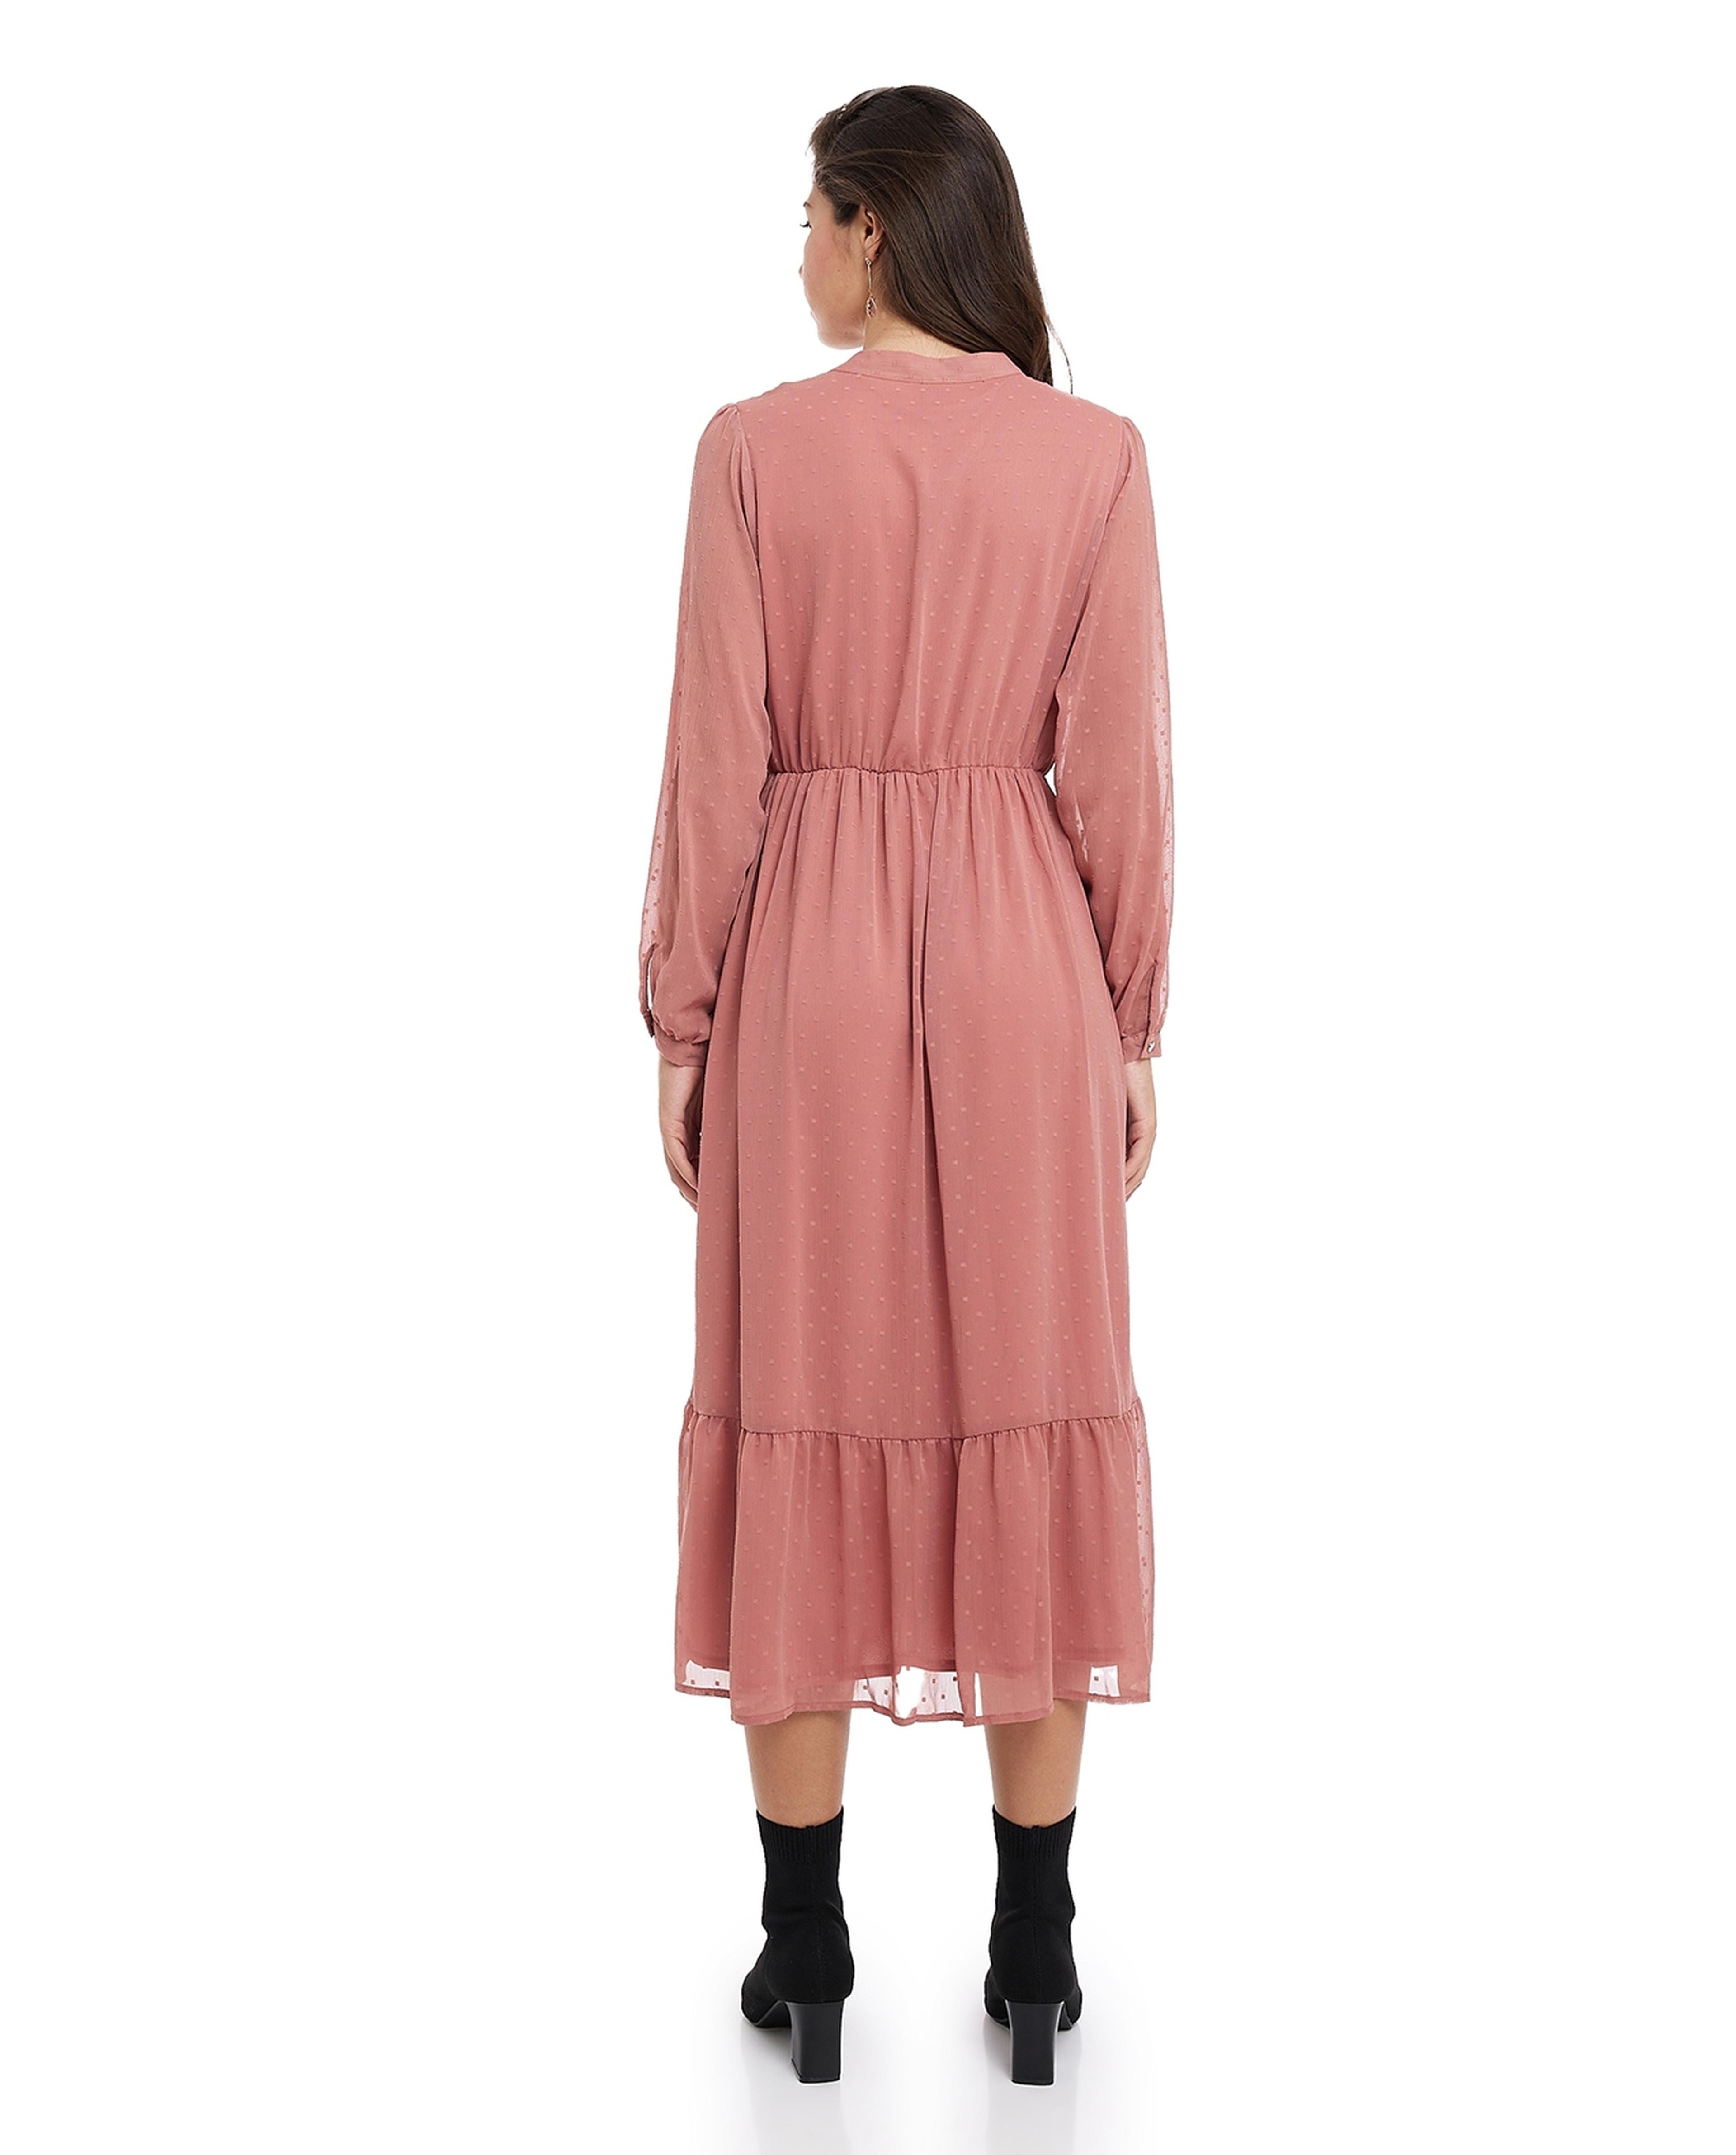 Woven Midi Dress with Surplice Neck and Bishop Sleeves